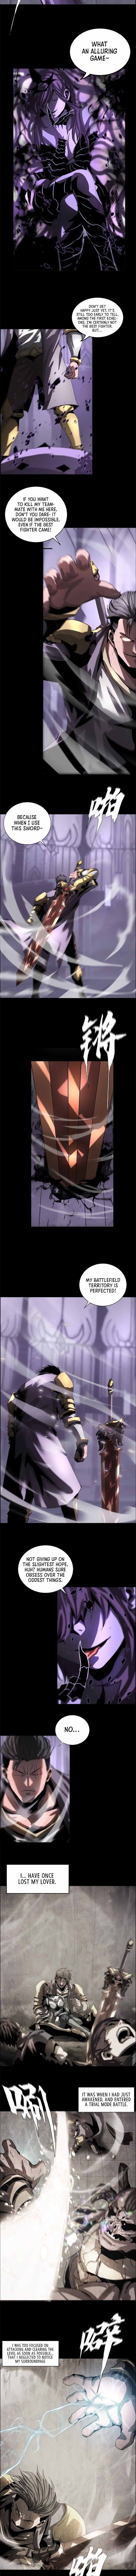 The Blade Of Evolution-Walking Alone In The Dungeon Chapter 43 page 6